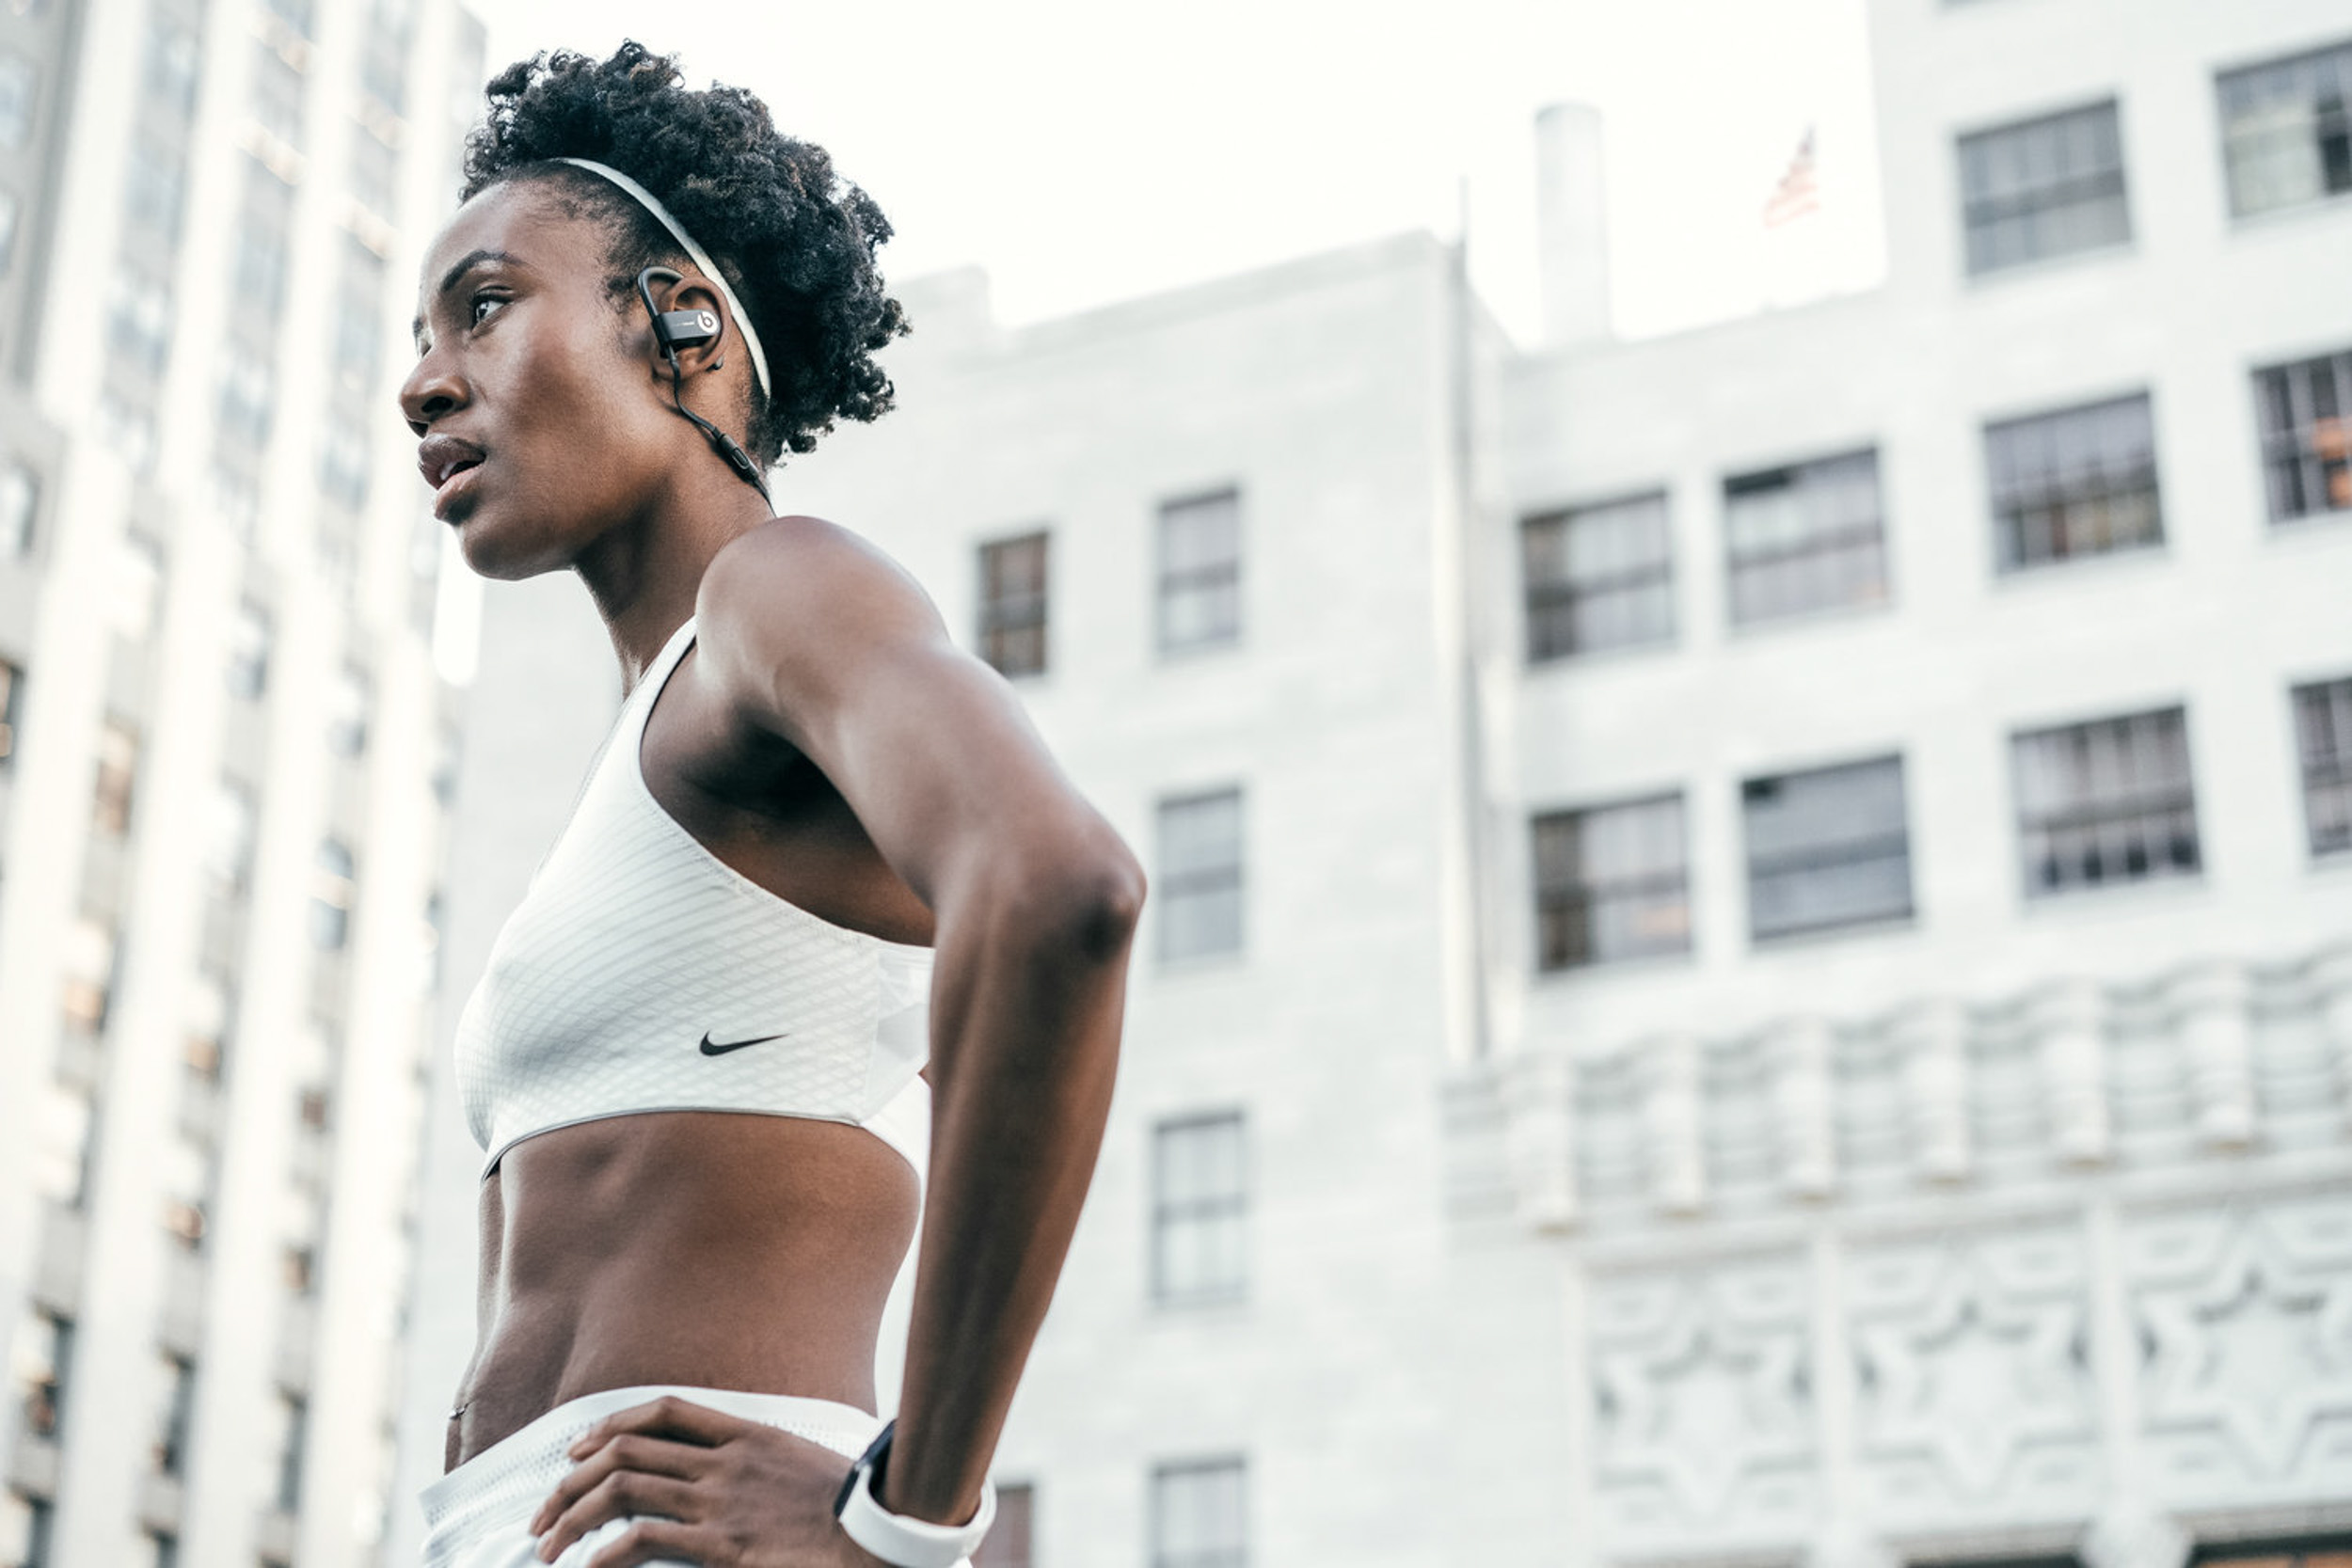 Female athlete in white Nike sports bra and shorts stands with hands on hips and looks into the distance